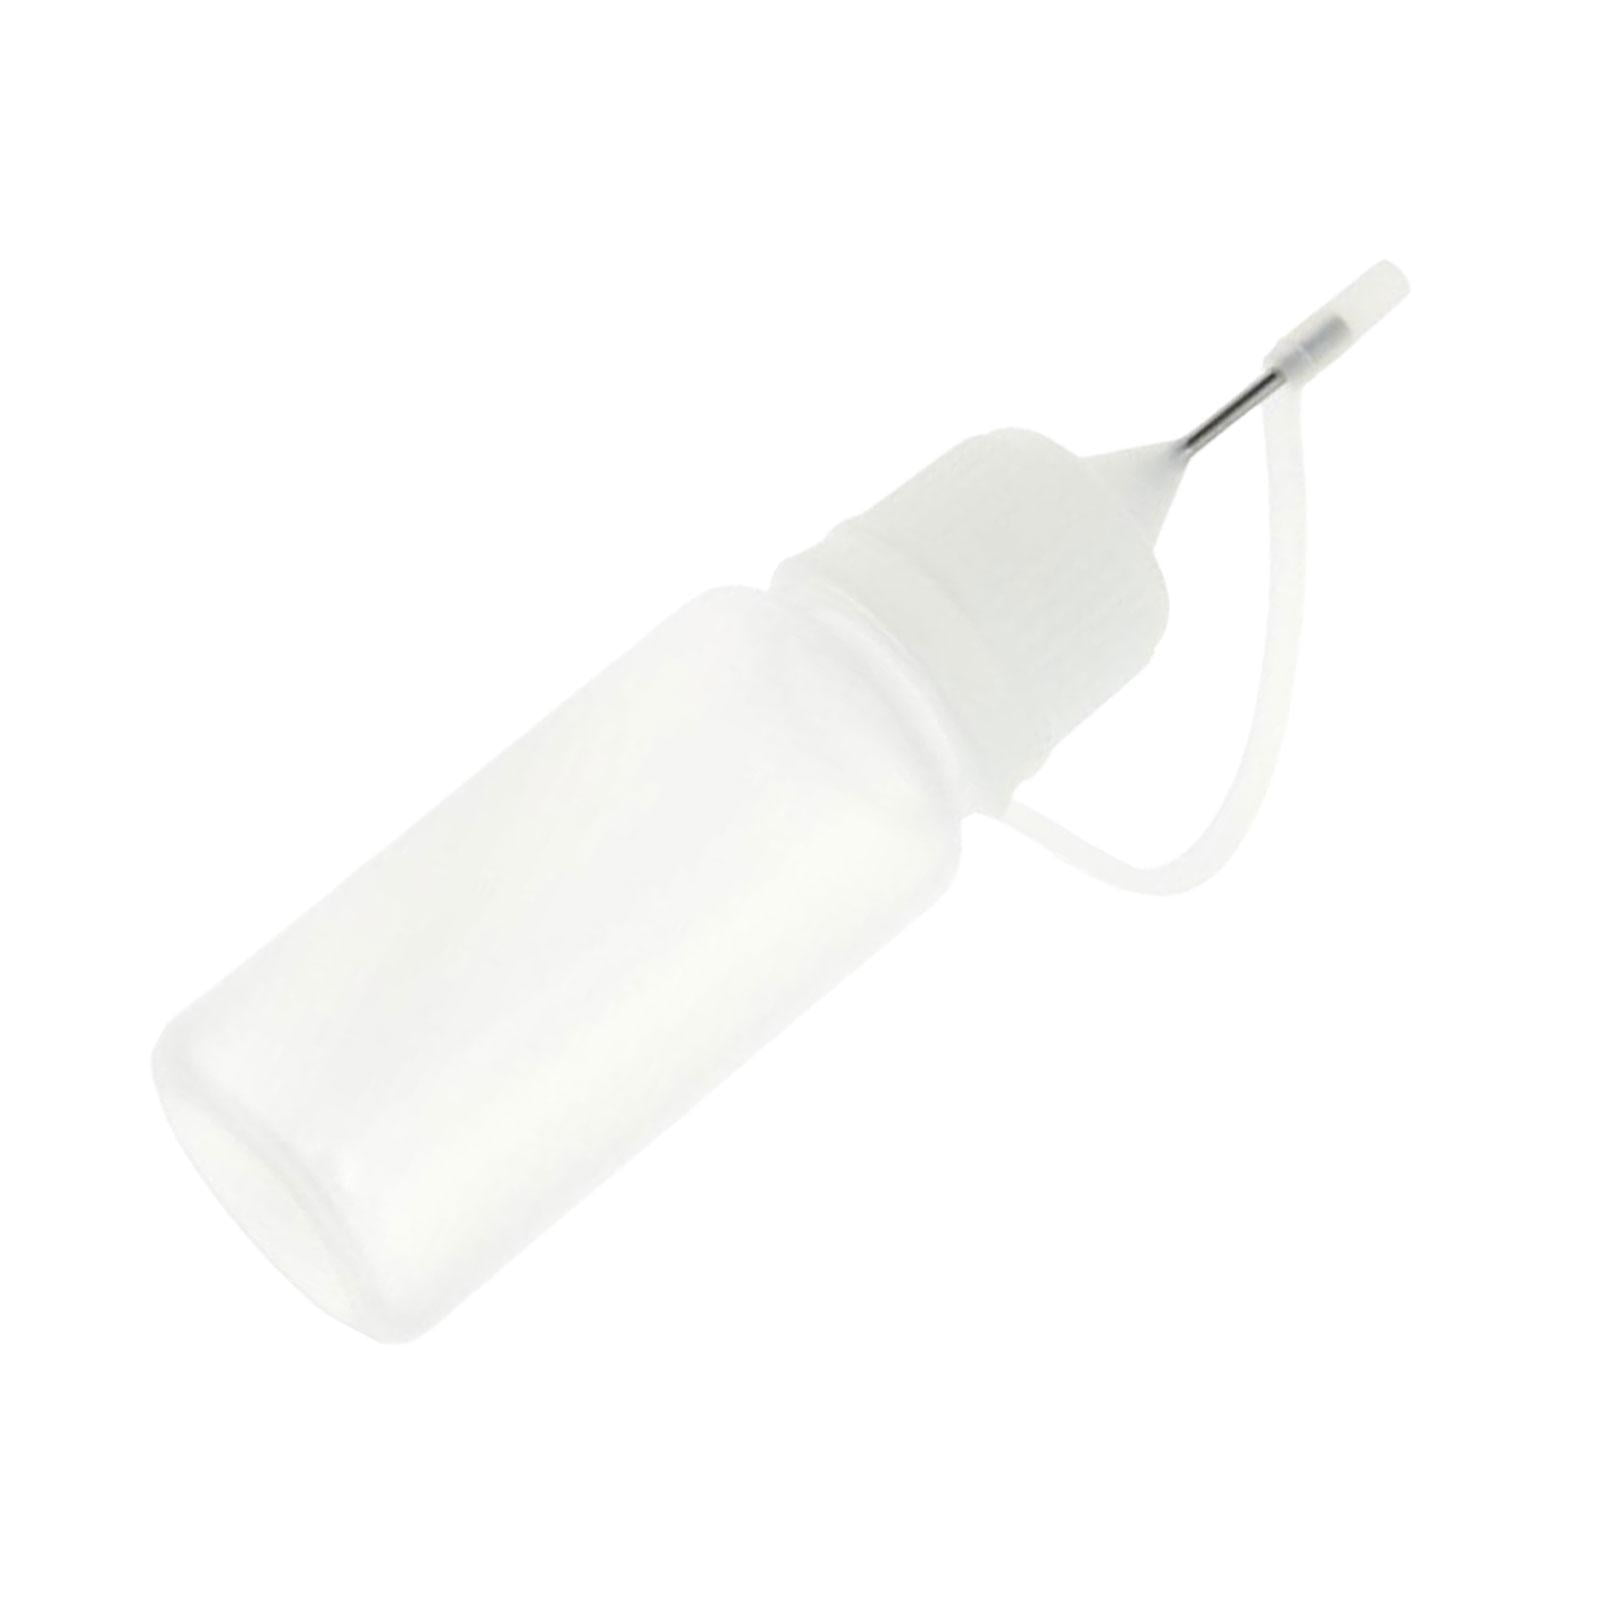 10ML Glue Applicator Needle Squeeze Bottle For Paper Quilling DIY  Scrapbooking Paper Craft Blending Brushes Factory Price Expert Design  Quality Latest Style Original From Freelady, $4.34